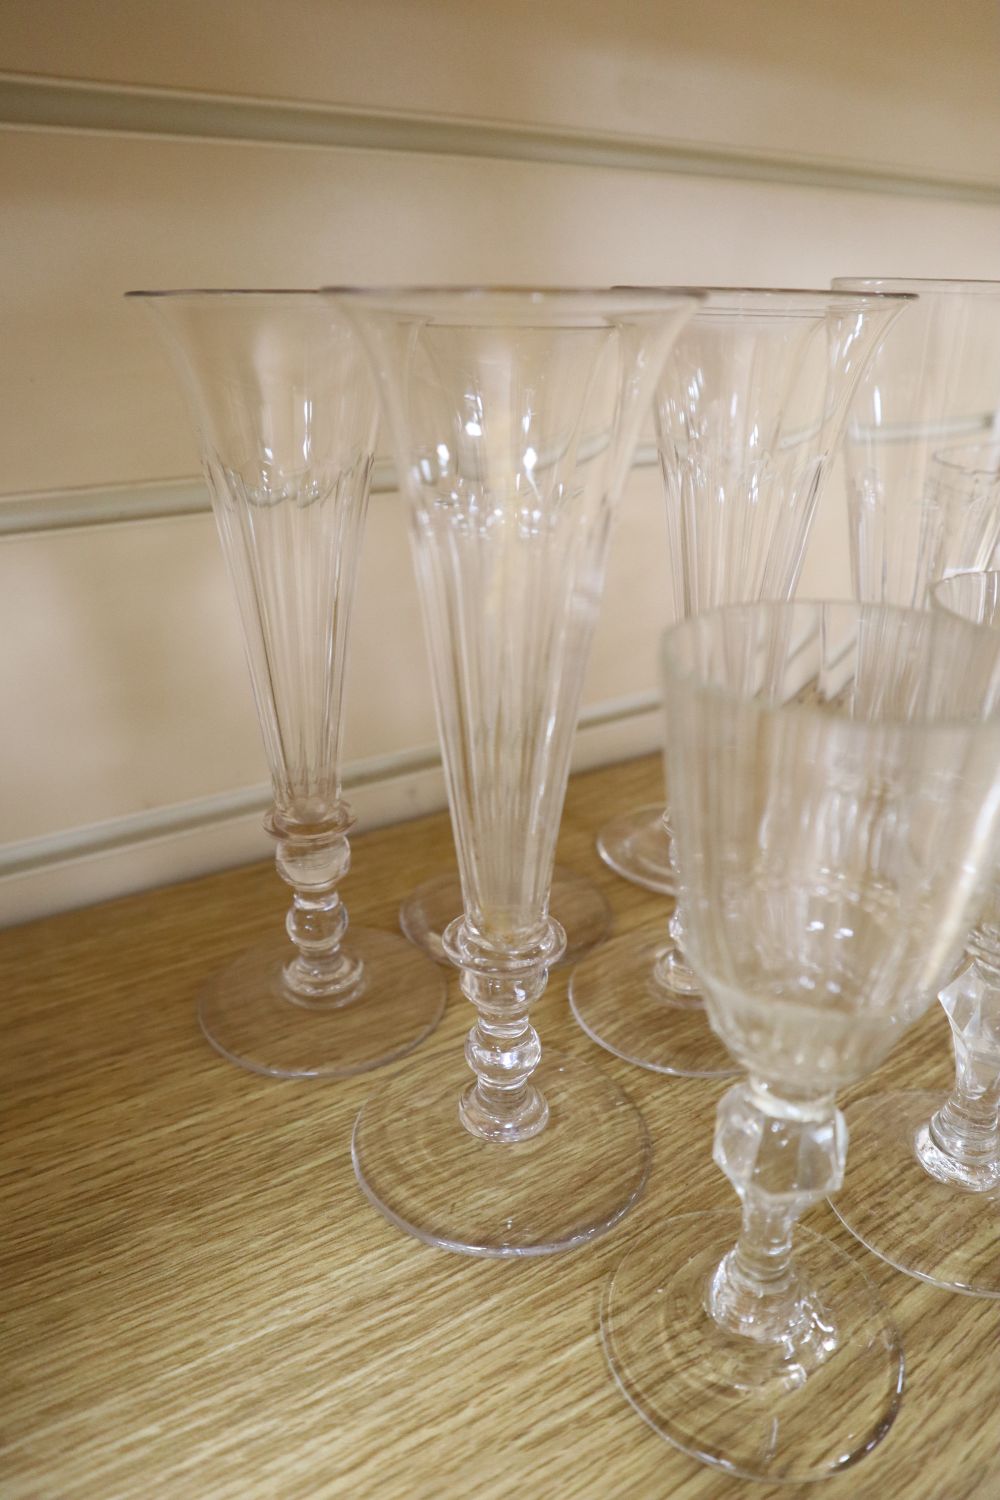 A group of four mid 19th century glass rummers, various cut glass champagne flutes etc.